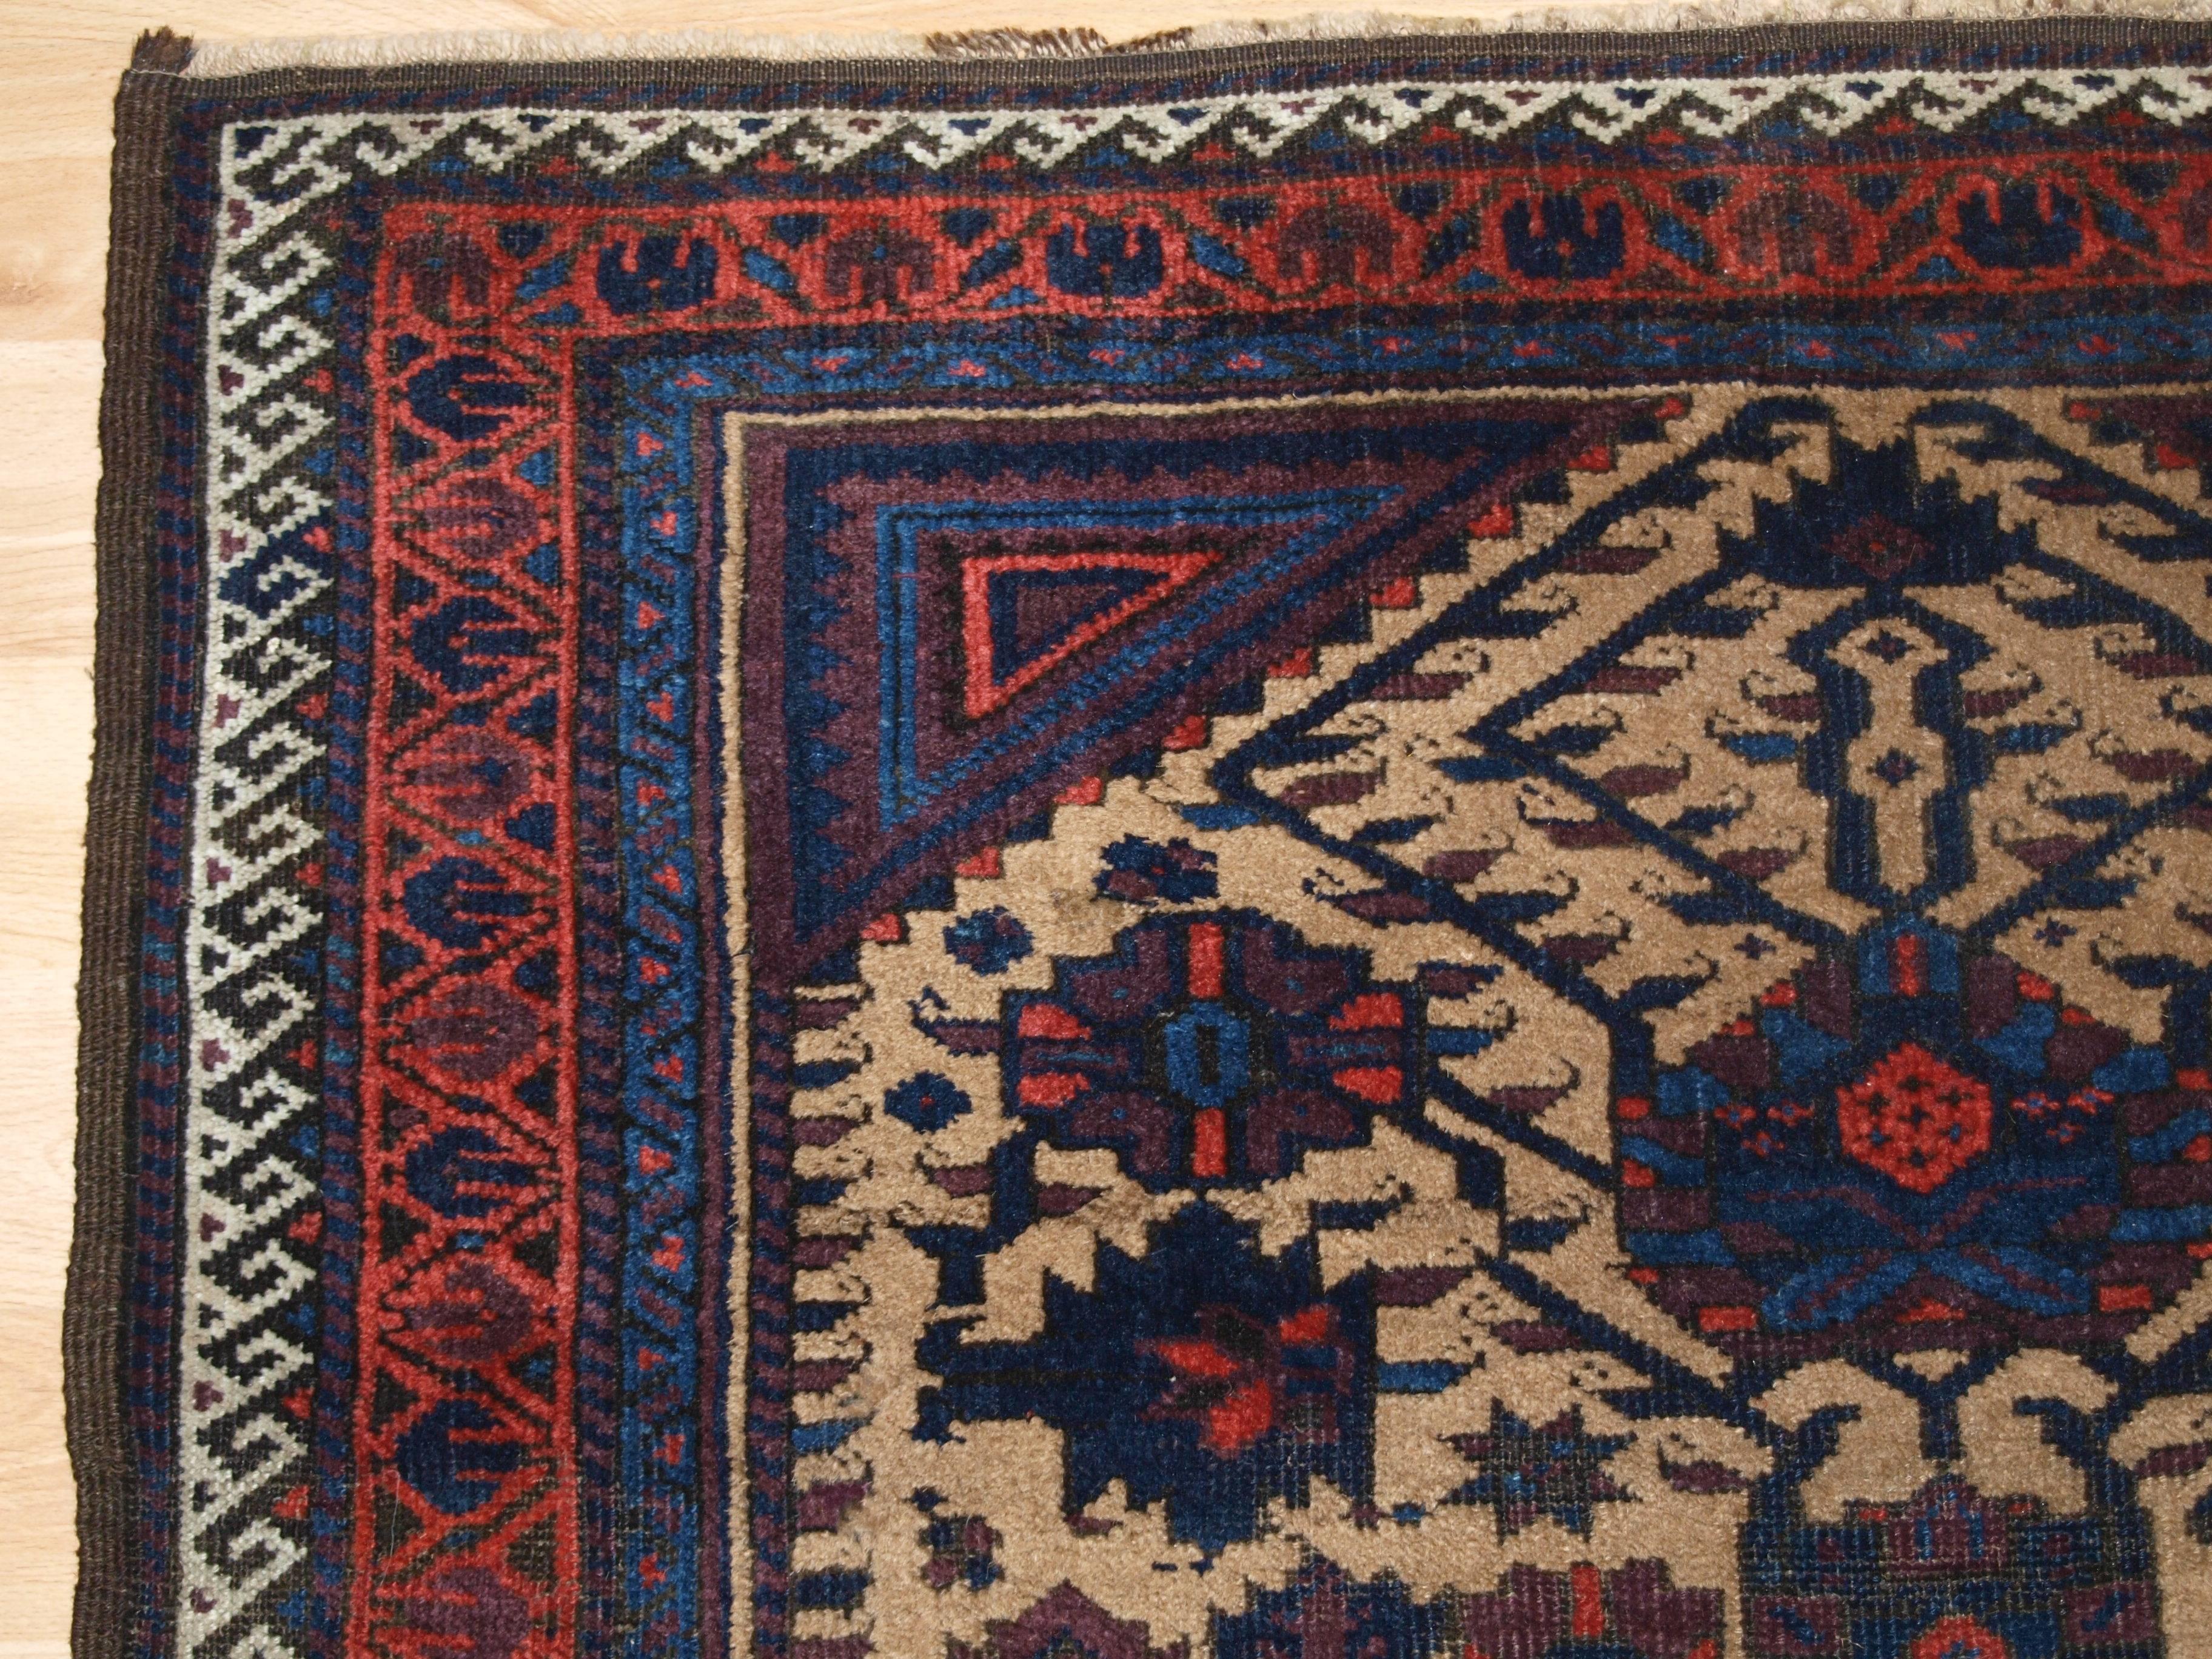 Antique baluch rug from ferdows region, camel ground, Classic design, circa 1900.
Size: 5ft 4in x 3ft 6in (162 x 107cm).

Antique Baluch rug, these Baluch rugs are known as Arab Baluch from the Ferdows region,

circa 1900.

The rug has a